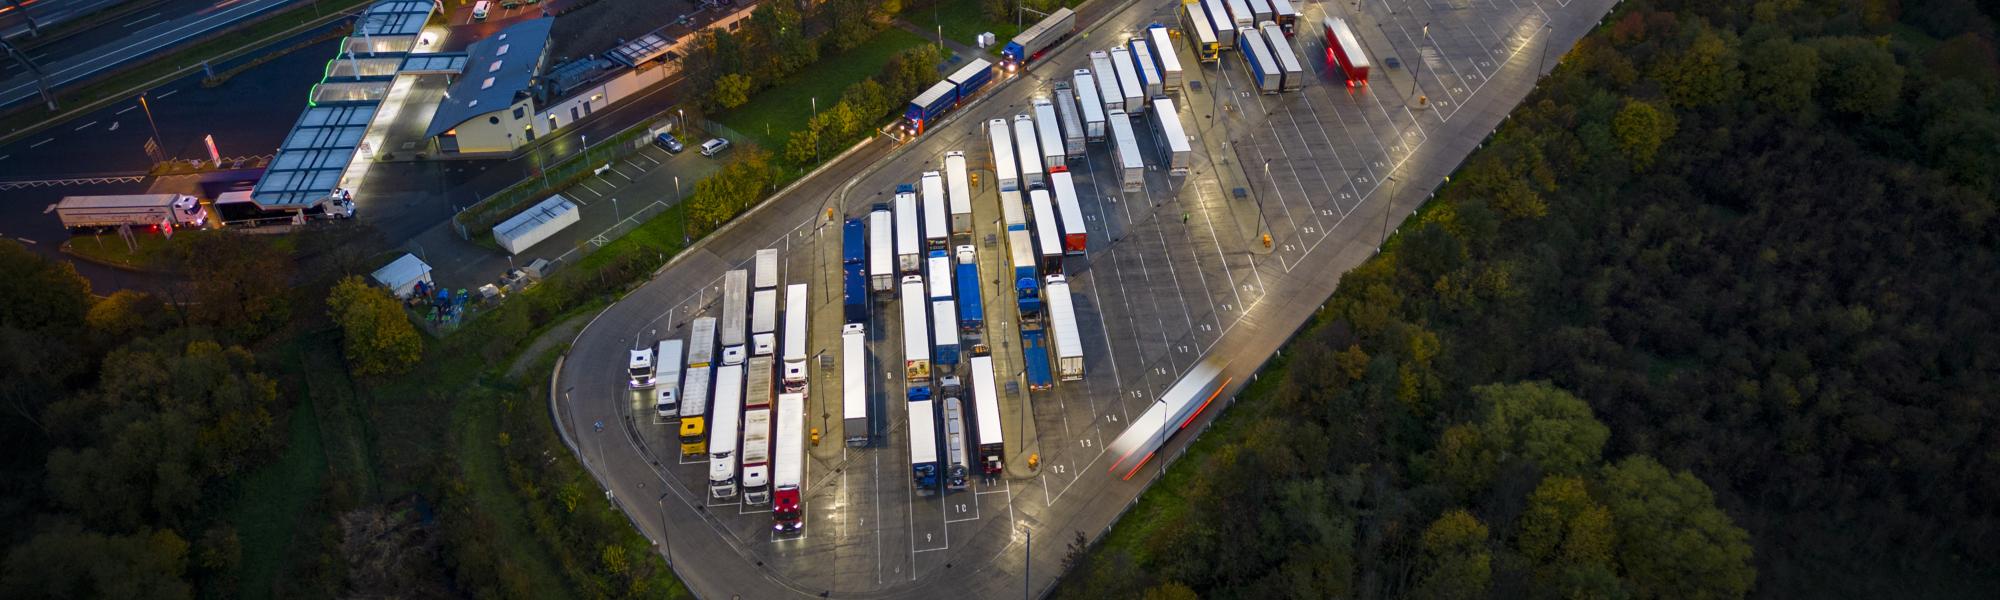 Operators, drivers and parking groups call for urgent EU truck parking deal